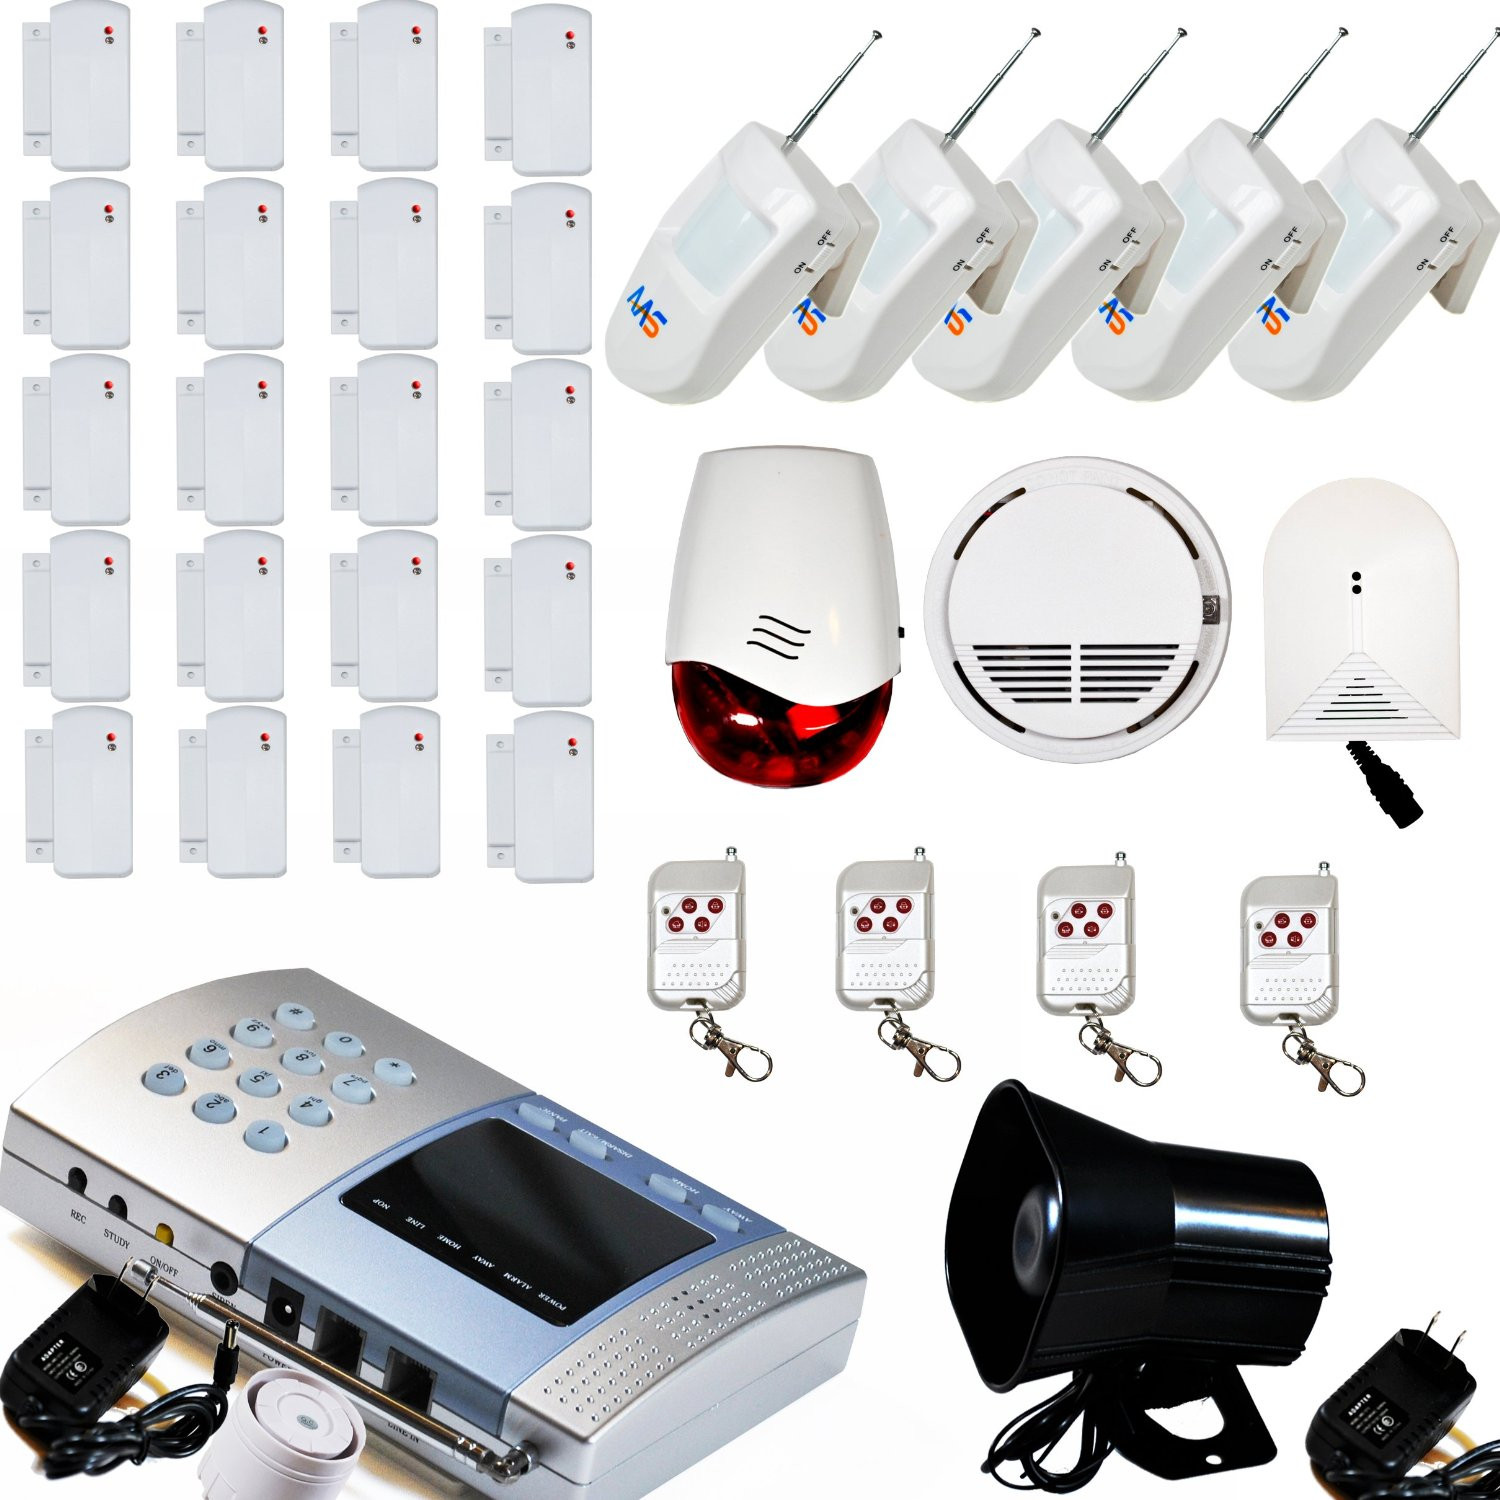 DIY Wireless Home Security Systems
 AAS V600 Wireless Home Security Alarm System Kit DIY